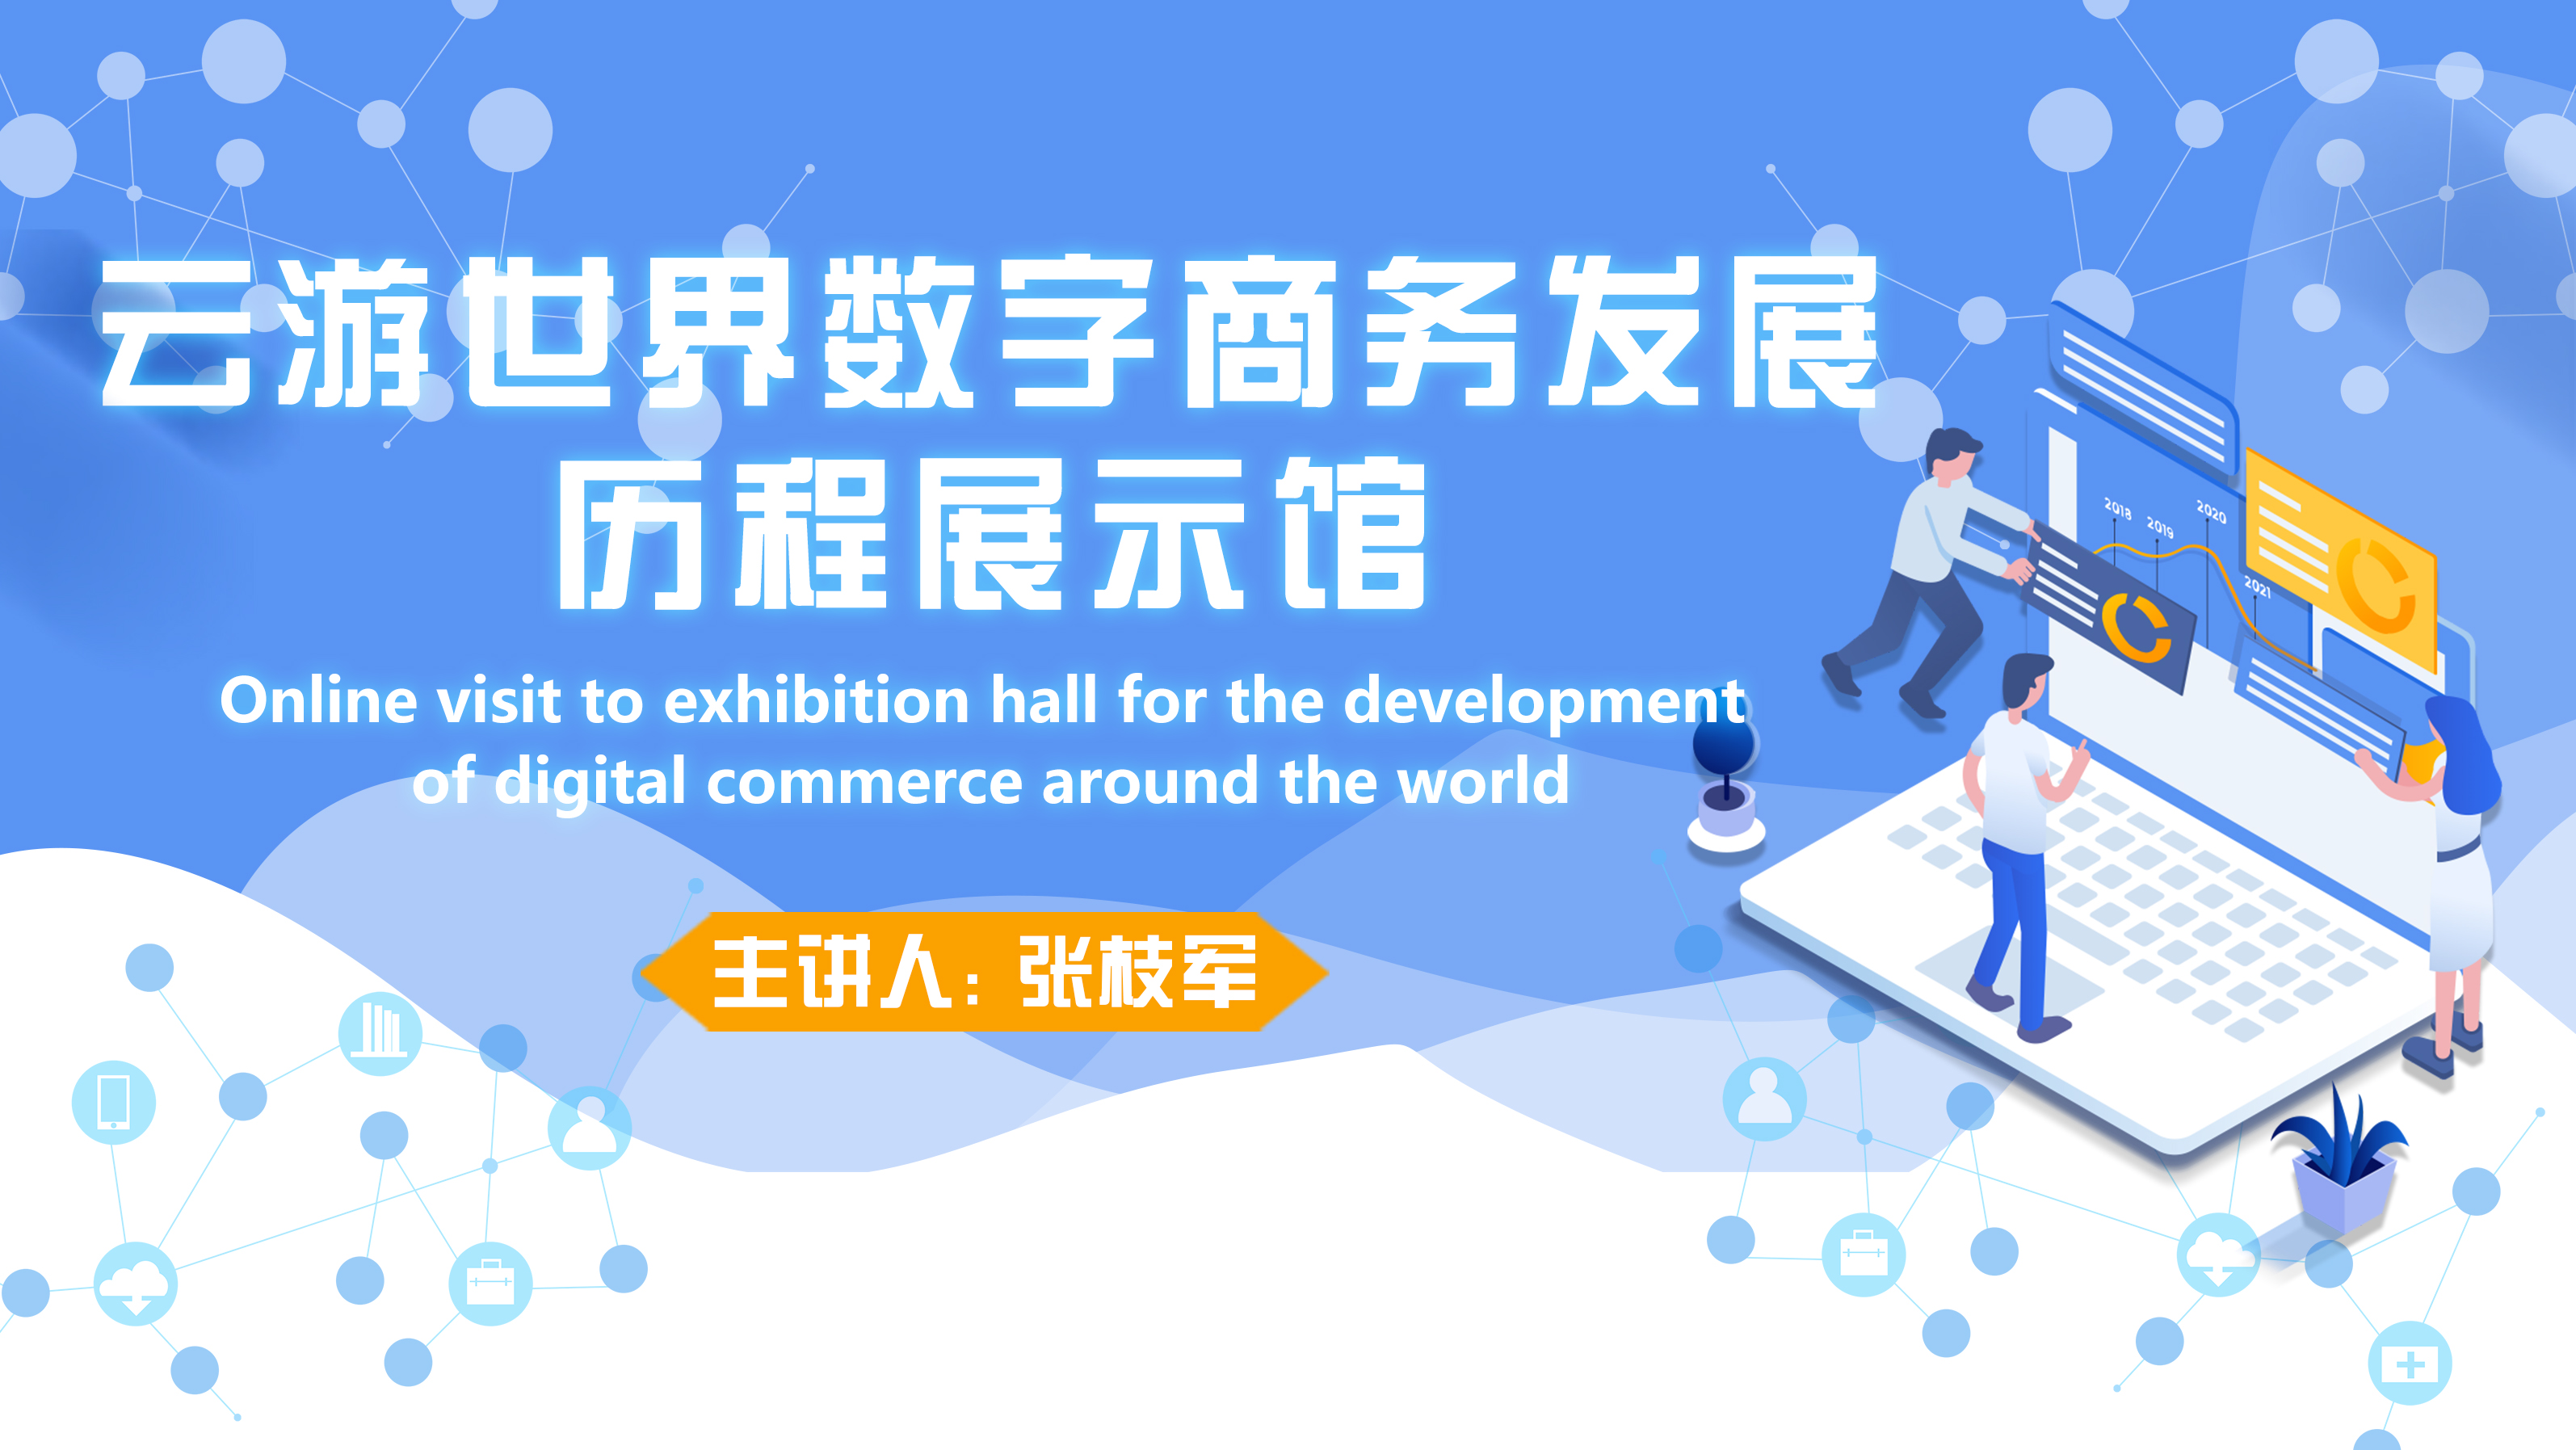 Online visit to exhibition hall for the development of digital commerce around the world